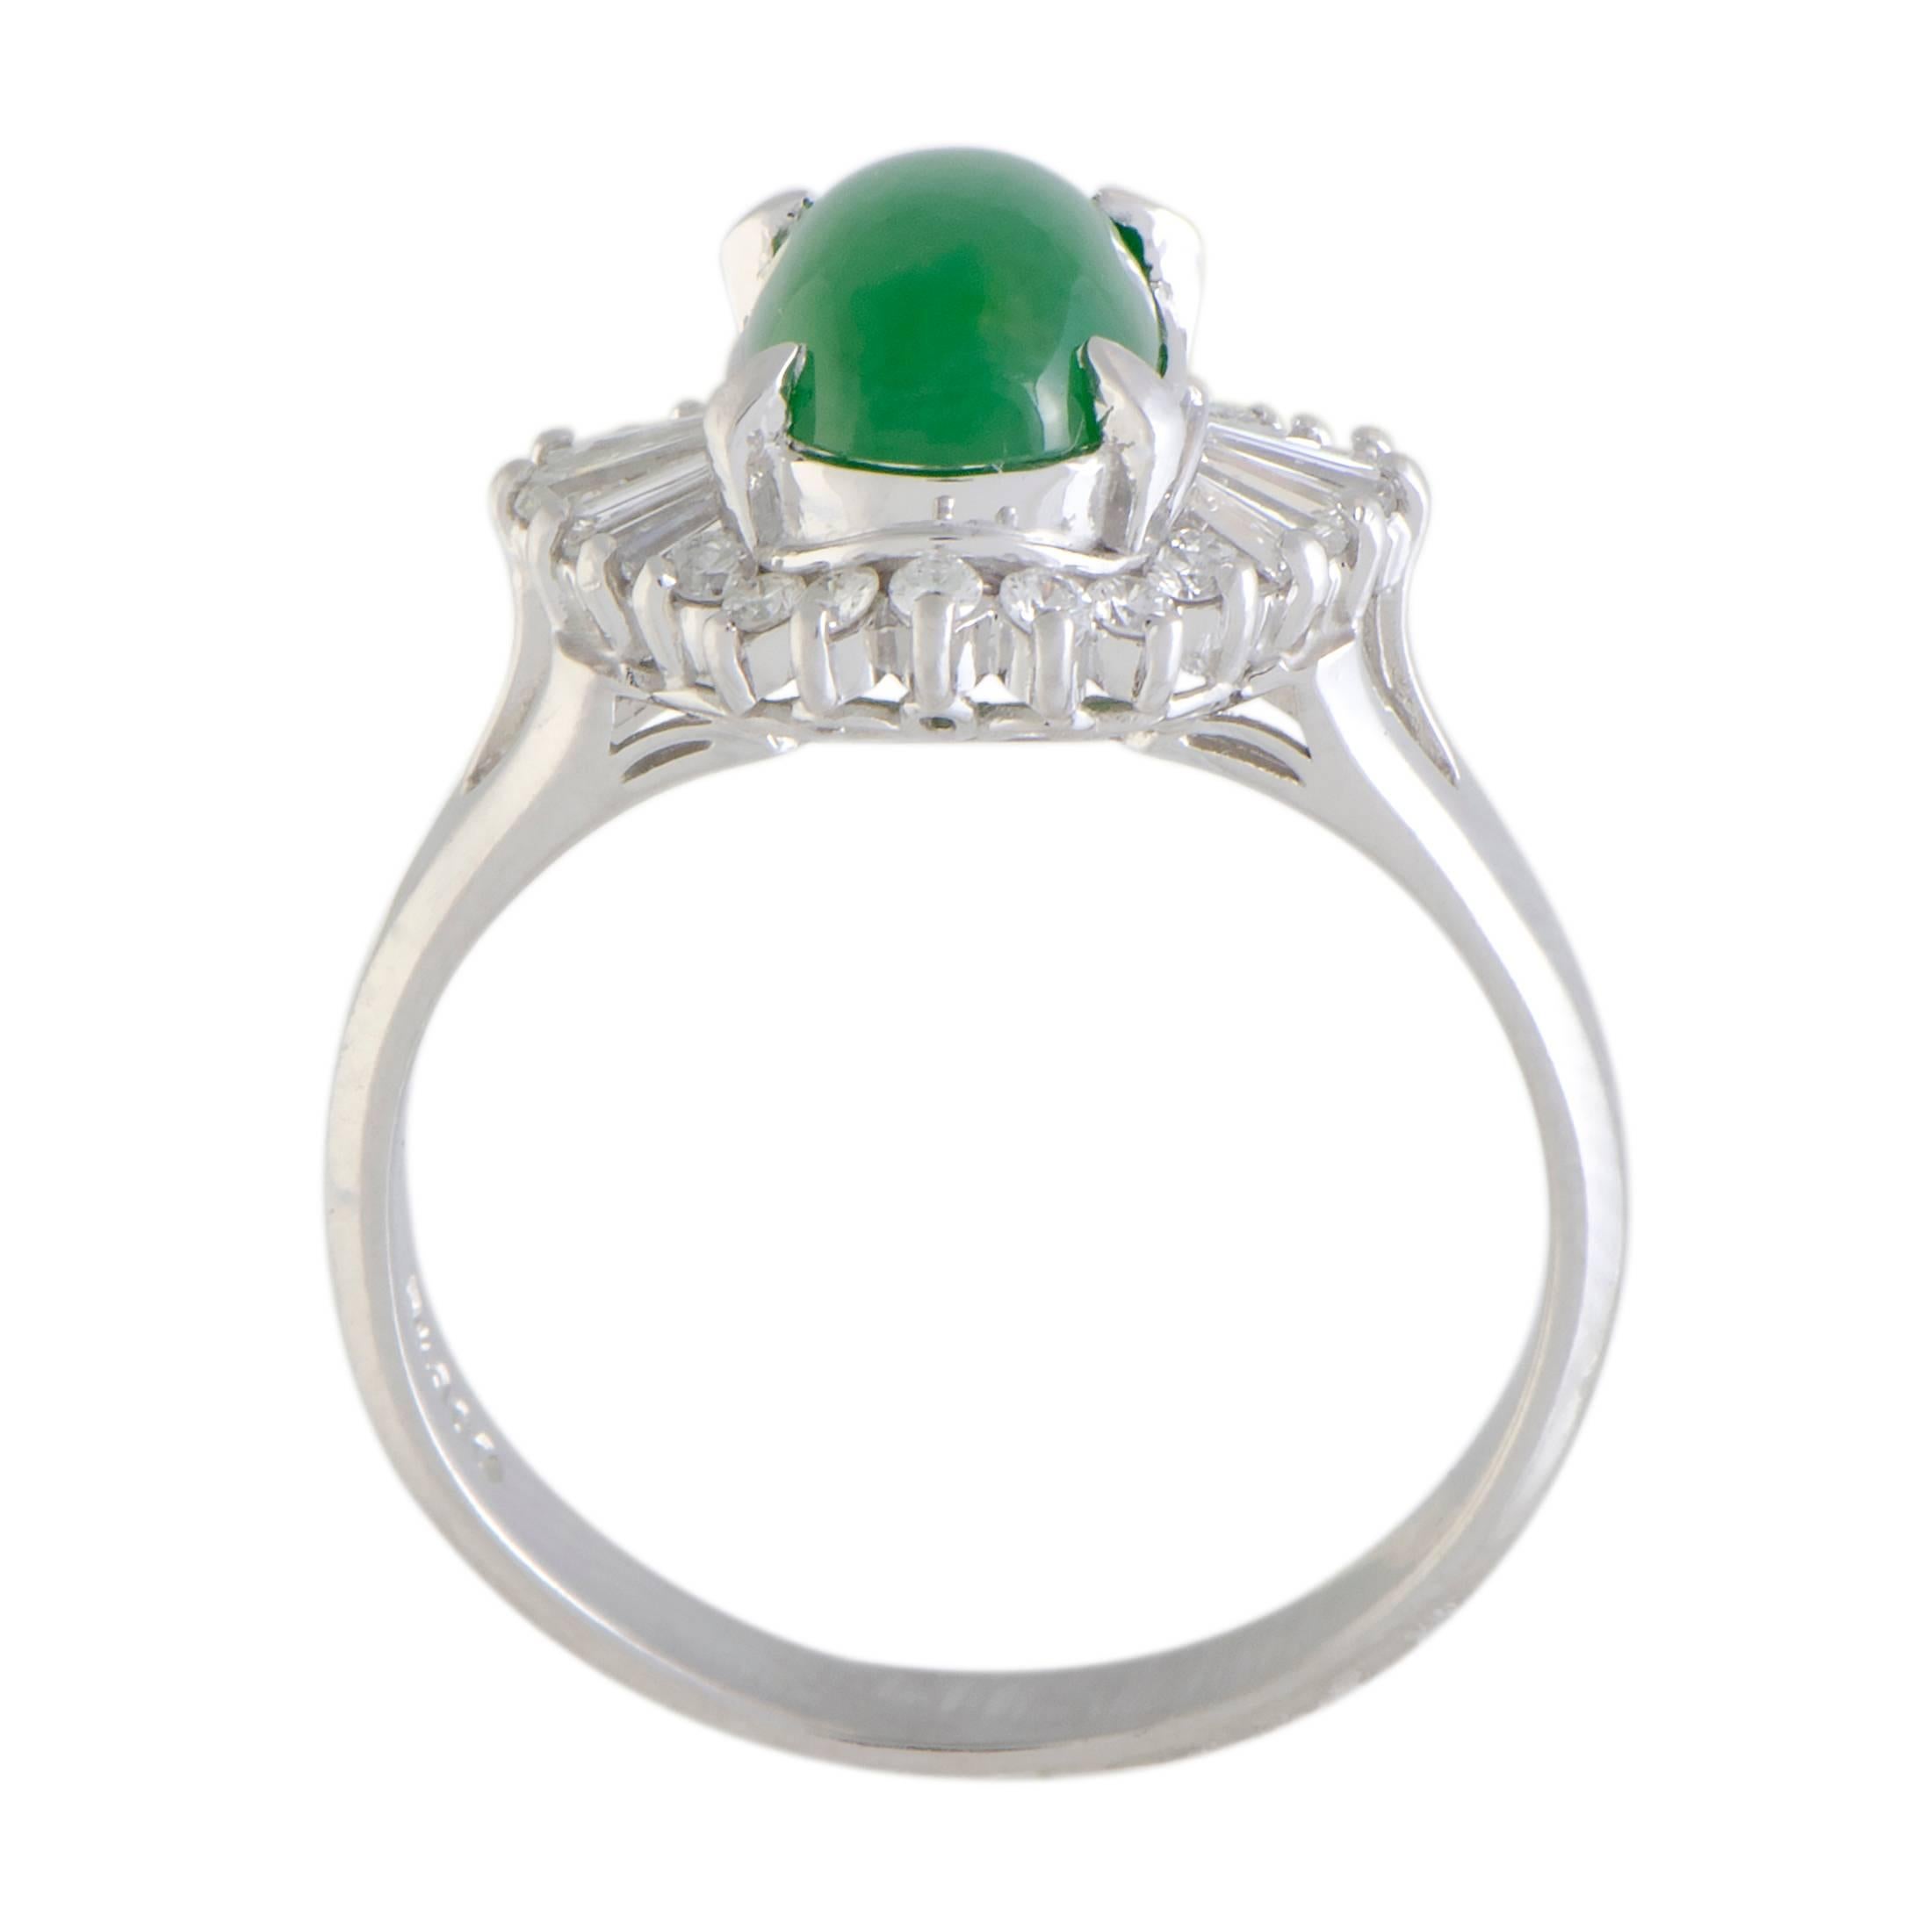 The ever-enchanting green jade stands out in magnificent fashion against the bright backdrop of platinum and diamonds in this spectacular ring. The diamonds amount to 0.38 carats, while the jade weighs 2.11 carats.
Ring Top Dimensions: 13mm x